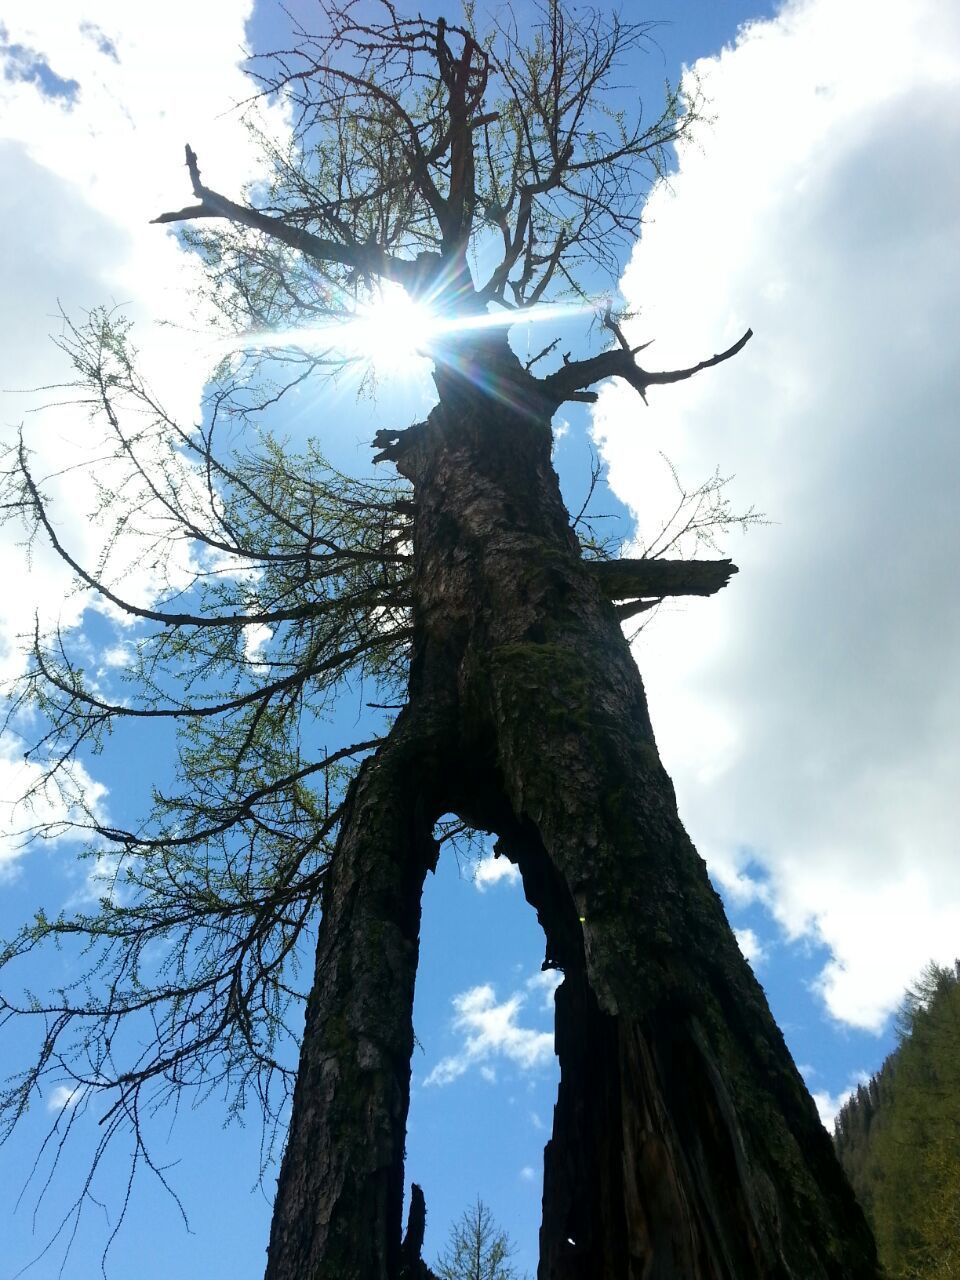 LOW ANGLE VIEW OF SCULPTURE ON TREE TRUNK AGAINST SKY